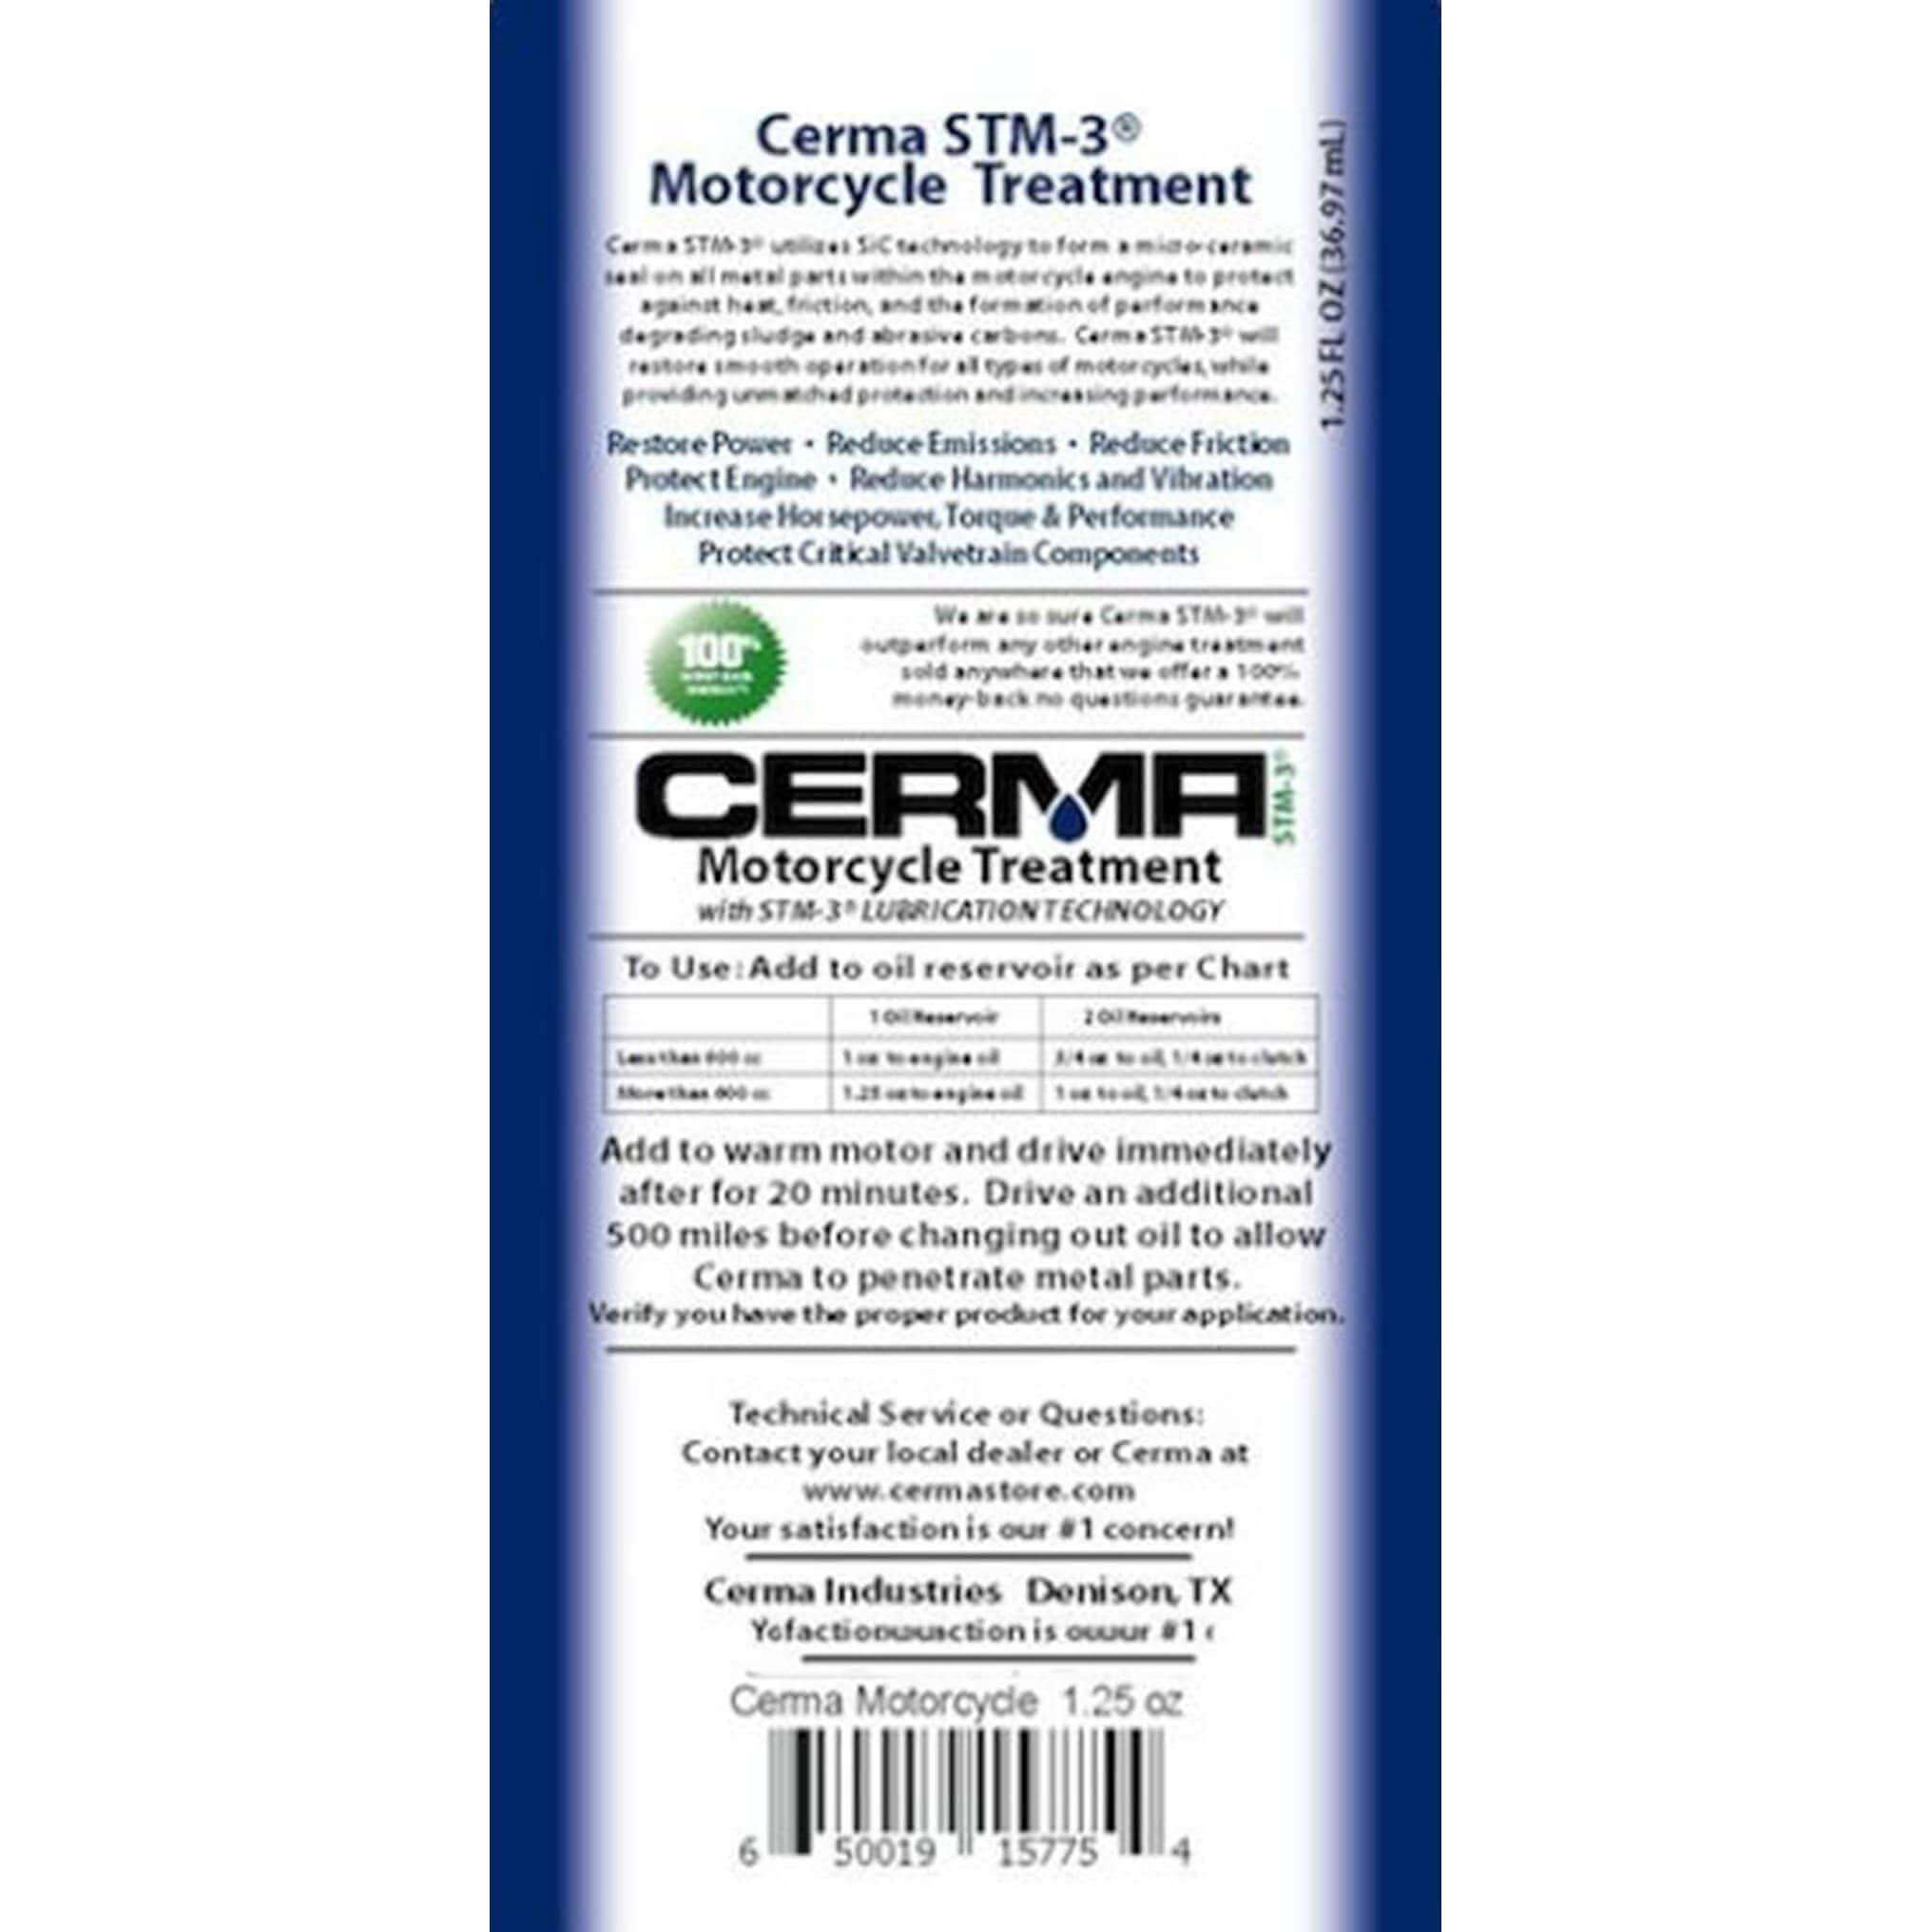 Ceramic Engine Treatment for Motorcycles at $71.5 only from cermatreatment.com